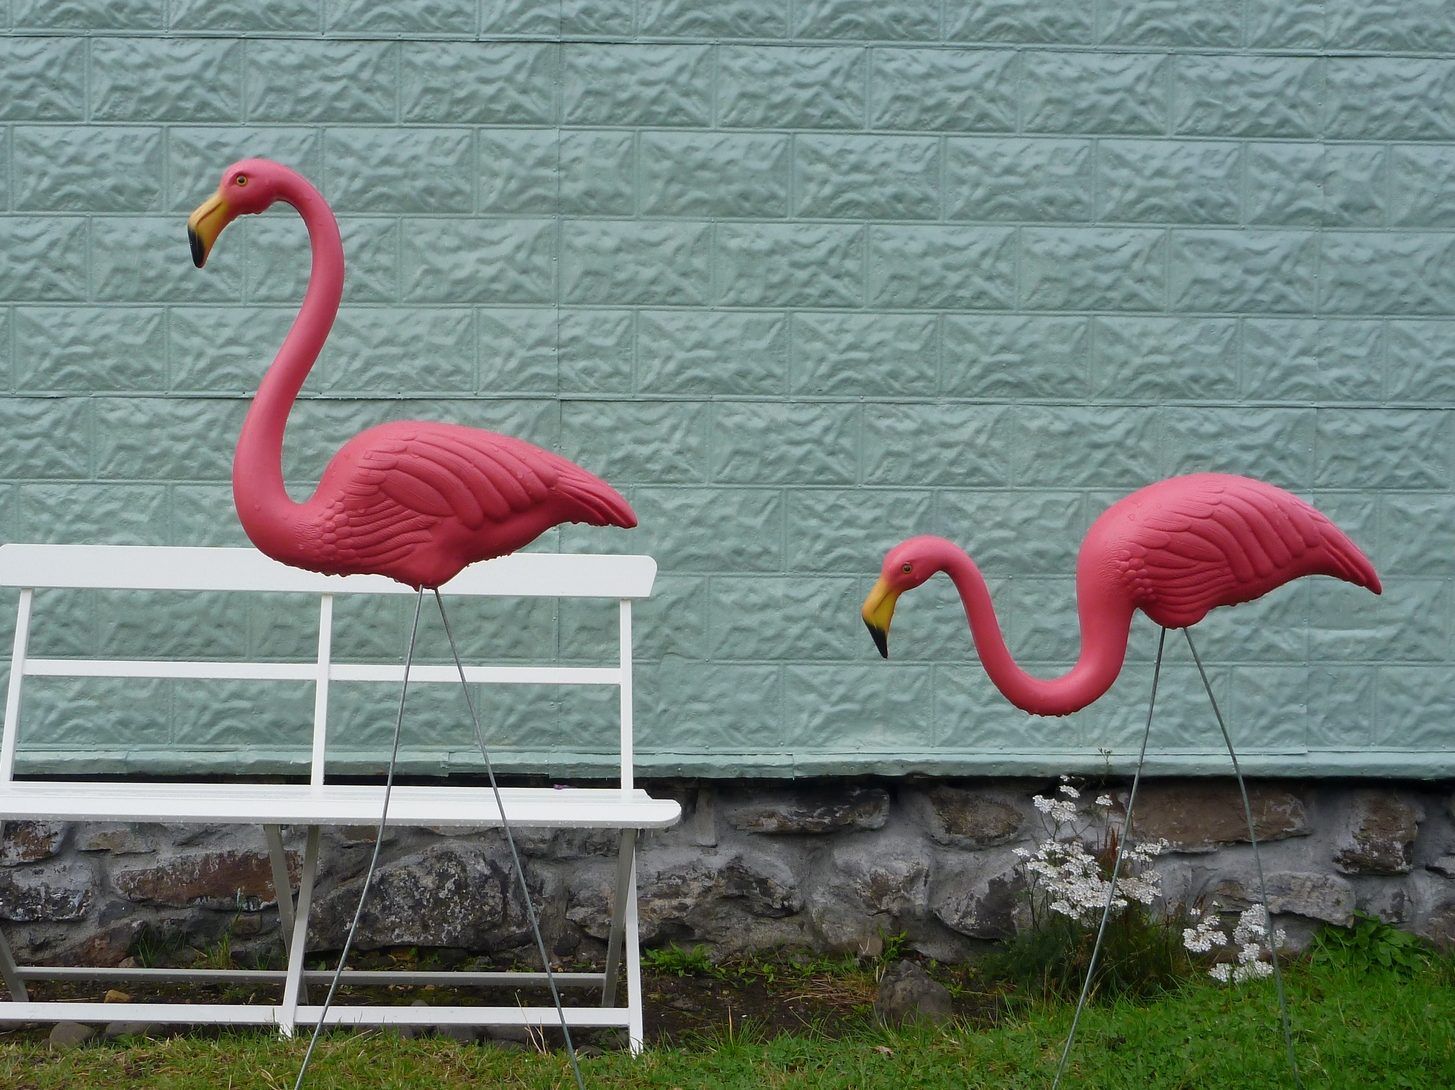 Pink lawn flamingos at RV parks means swingers live there Toronto